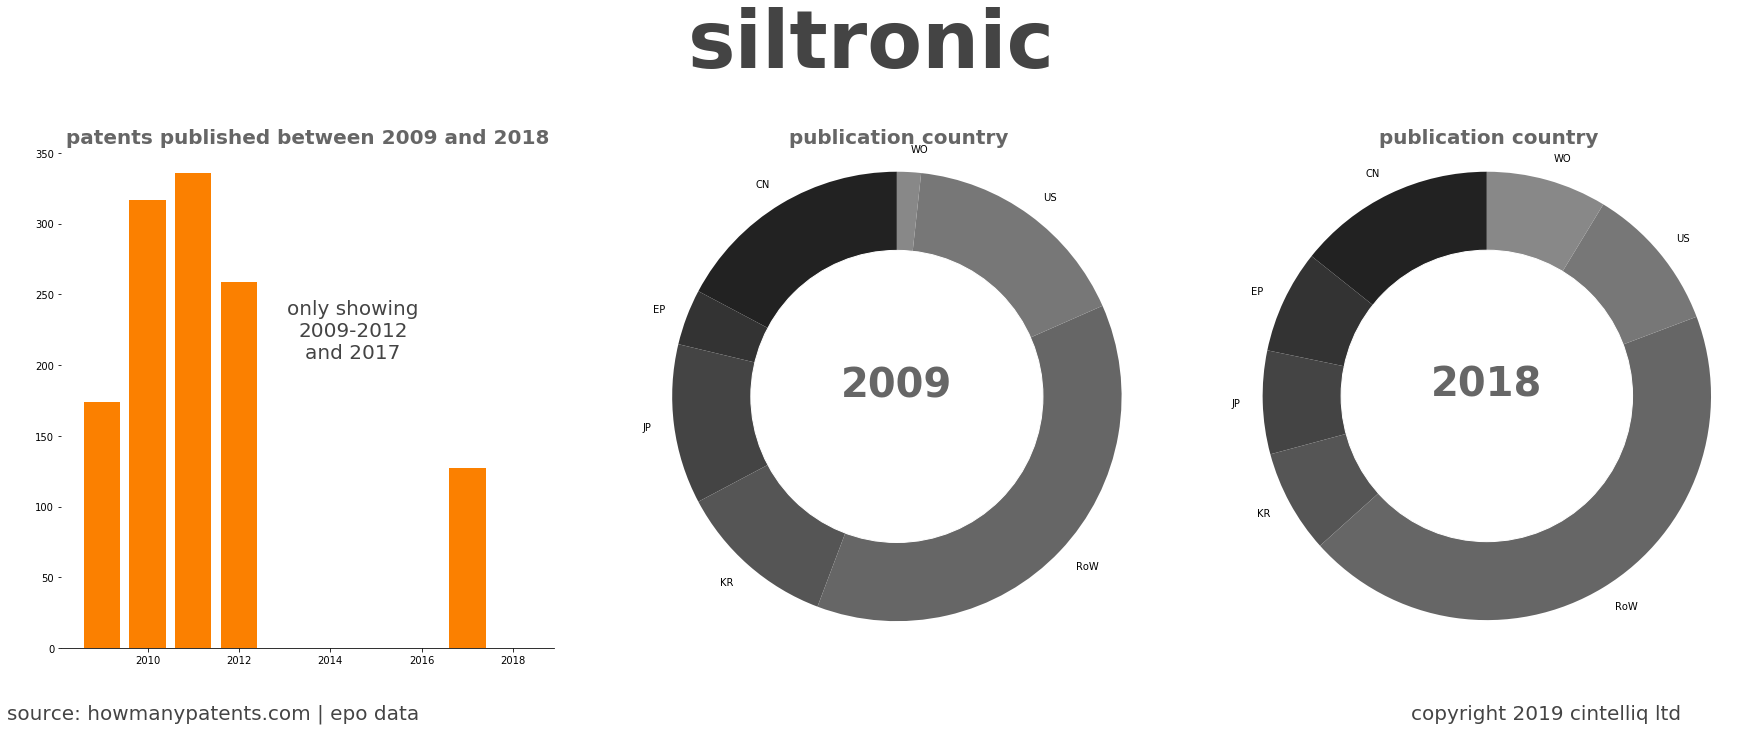 summary of patents for Siltronic